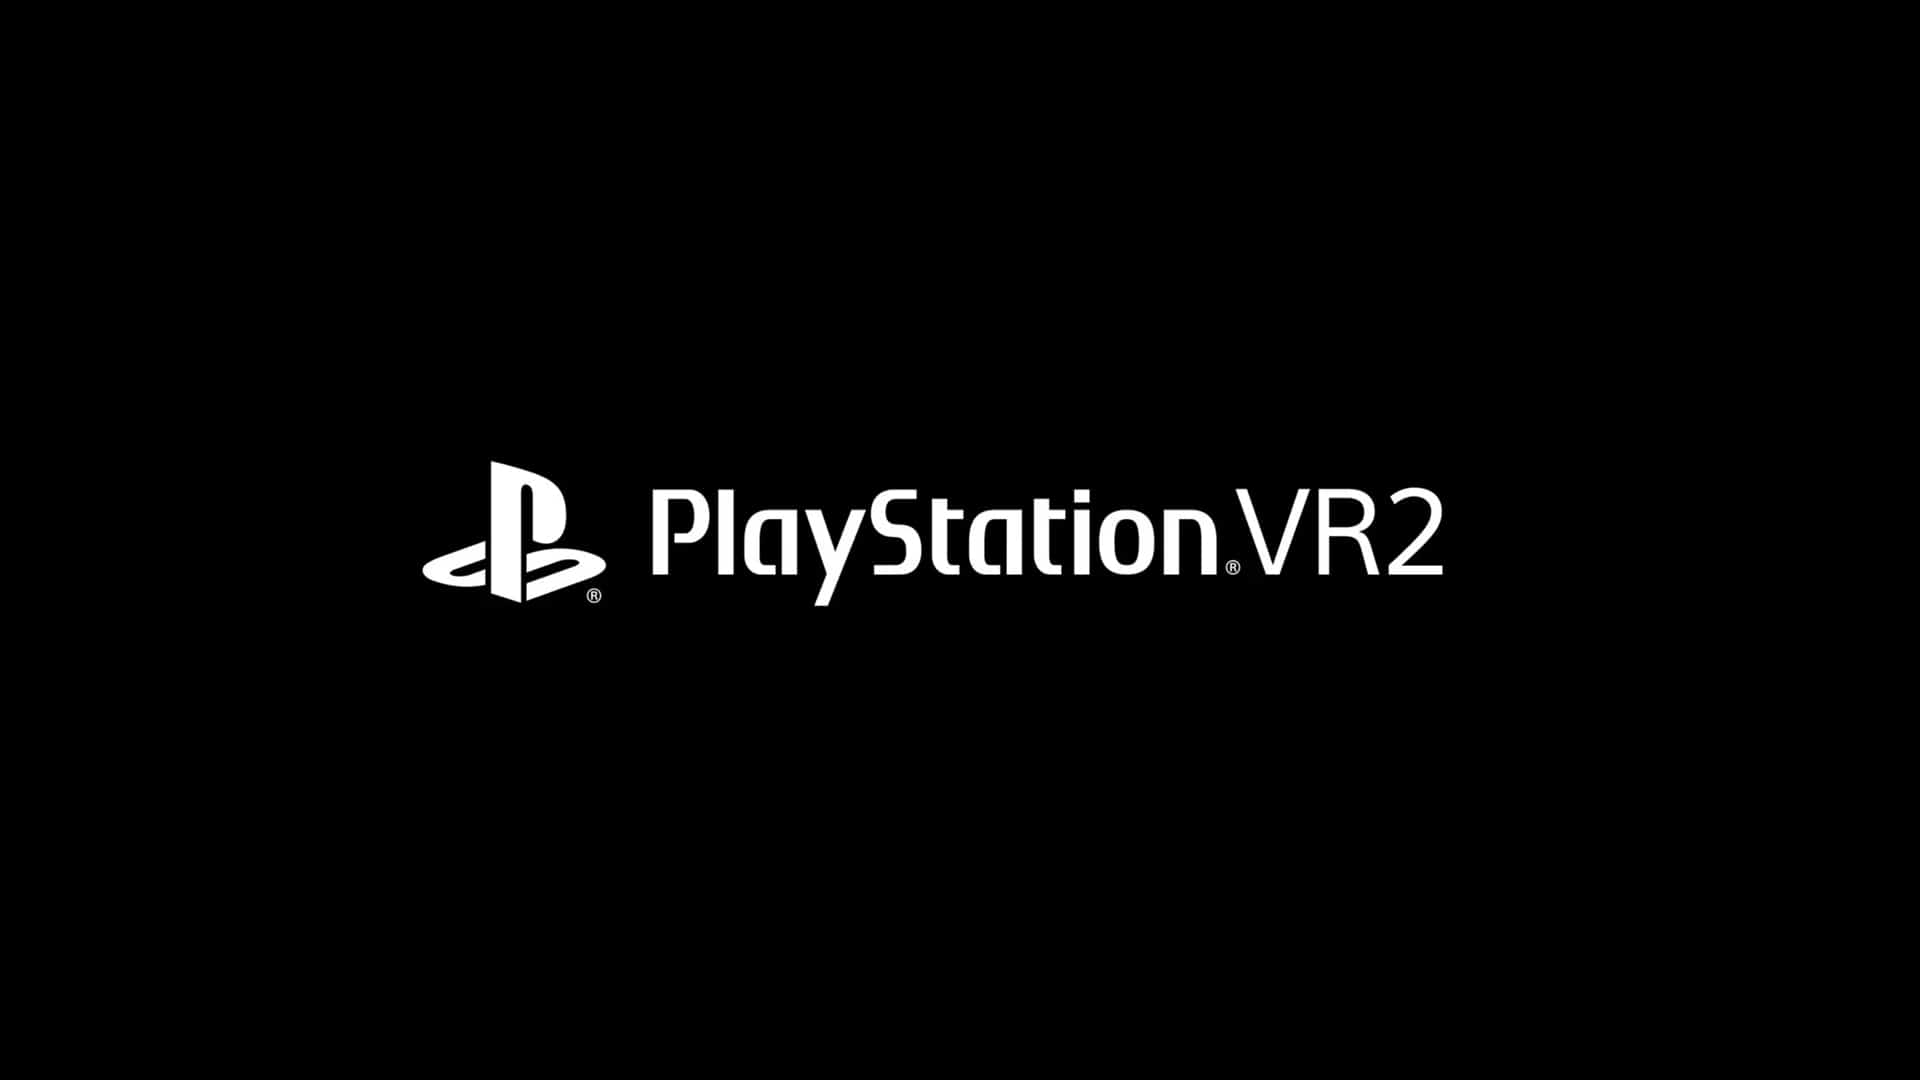 PlayStation VR2 is a 4K headset with eye-tracking and rumble for PS5